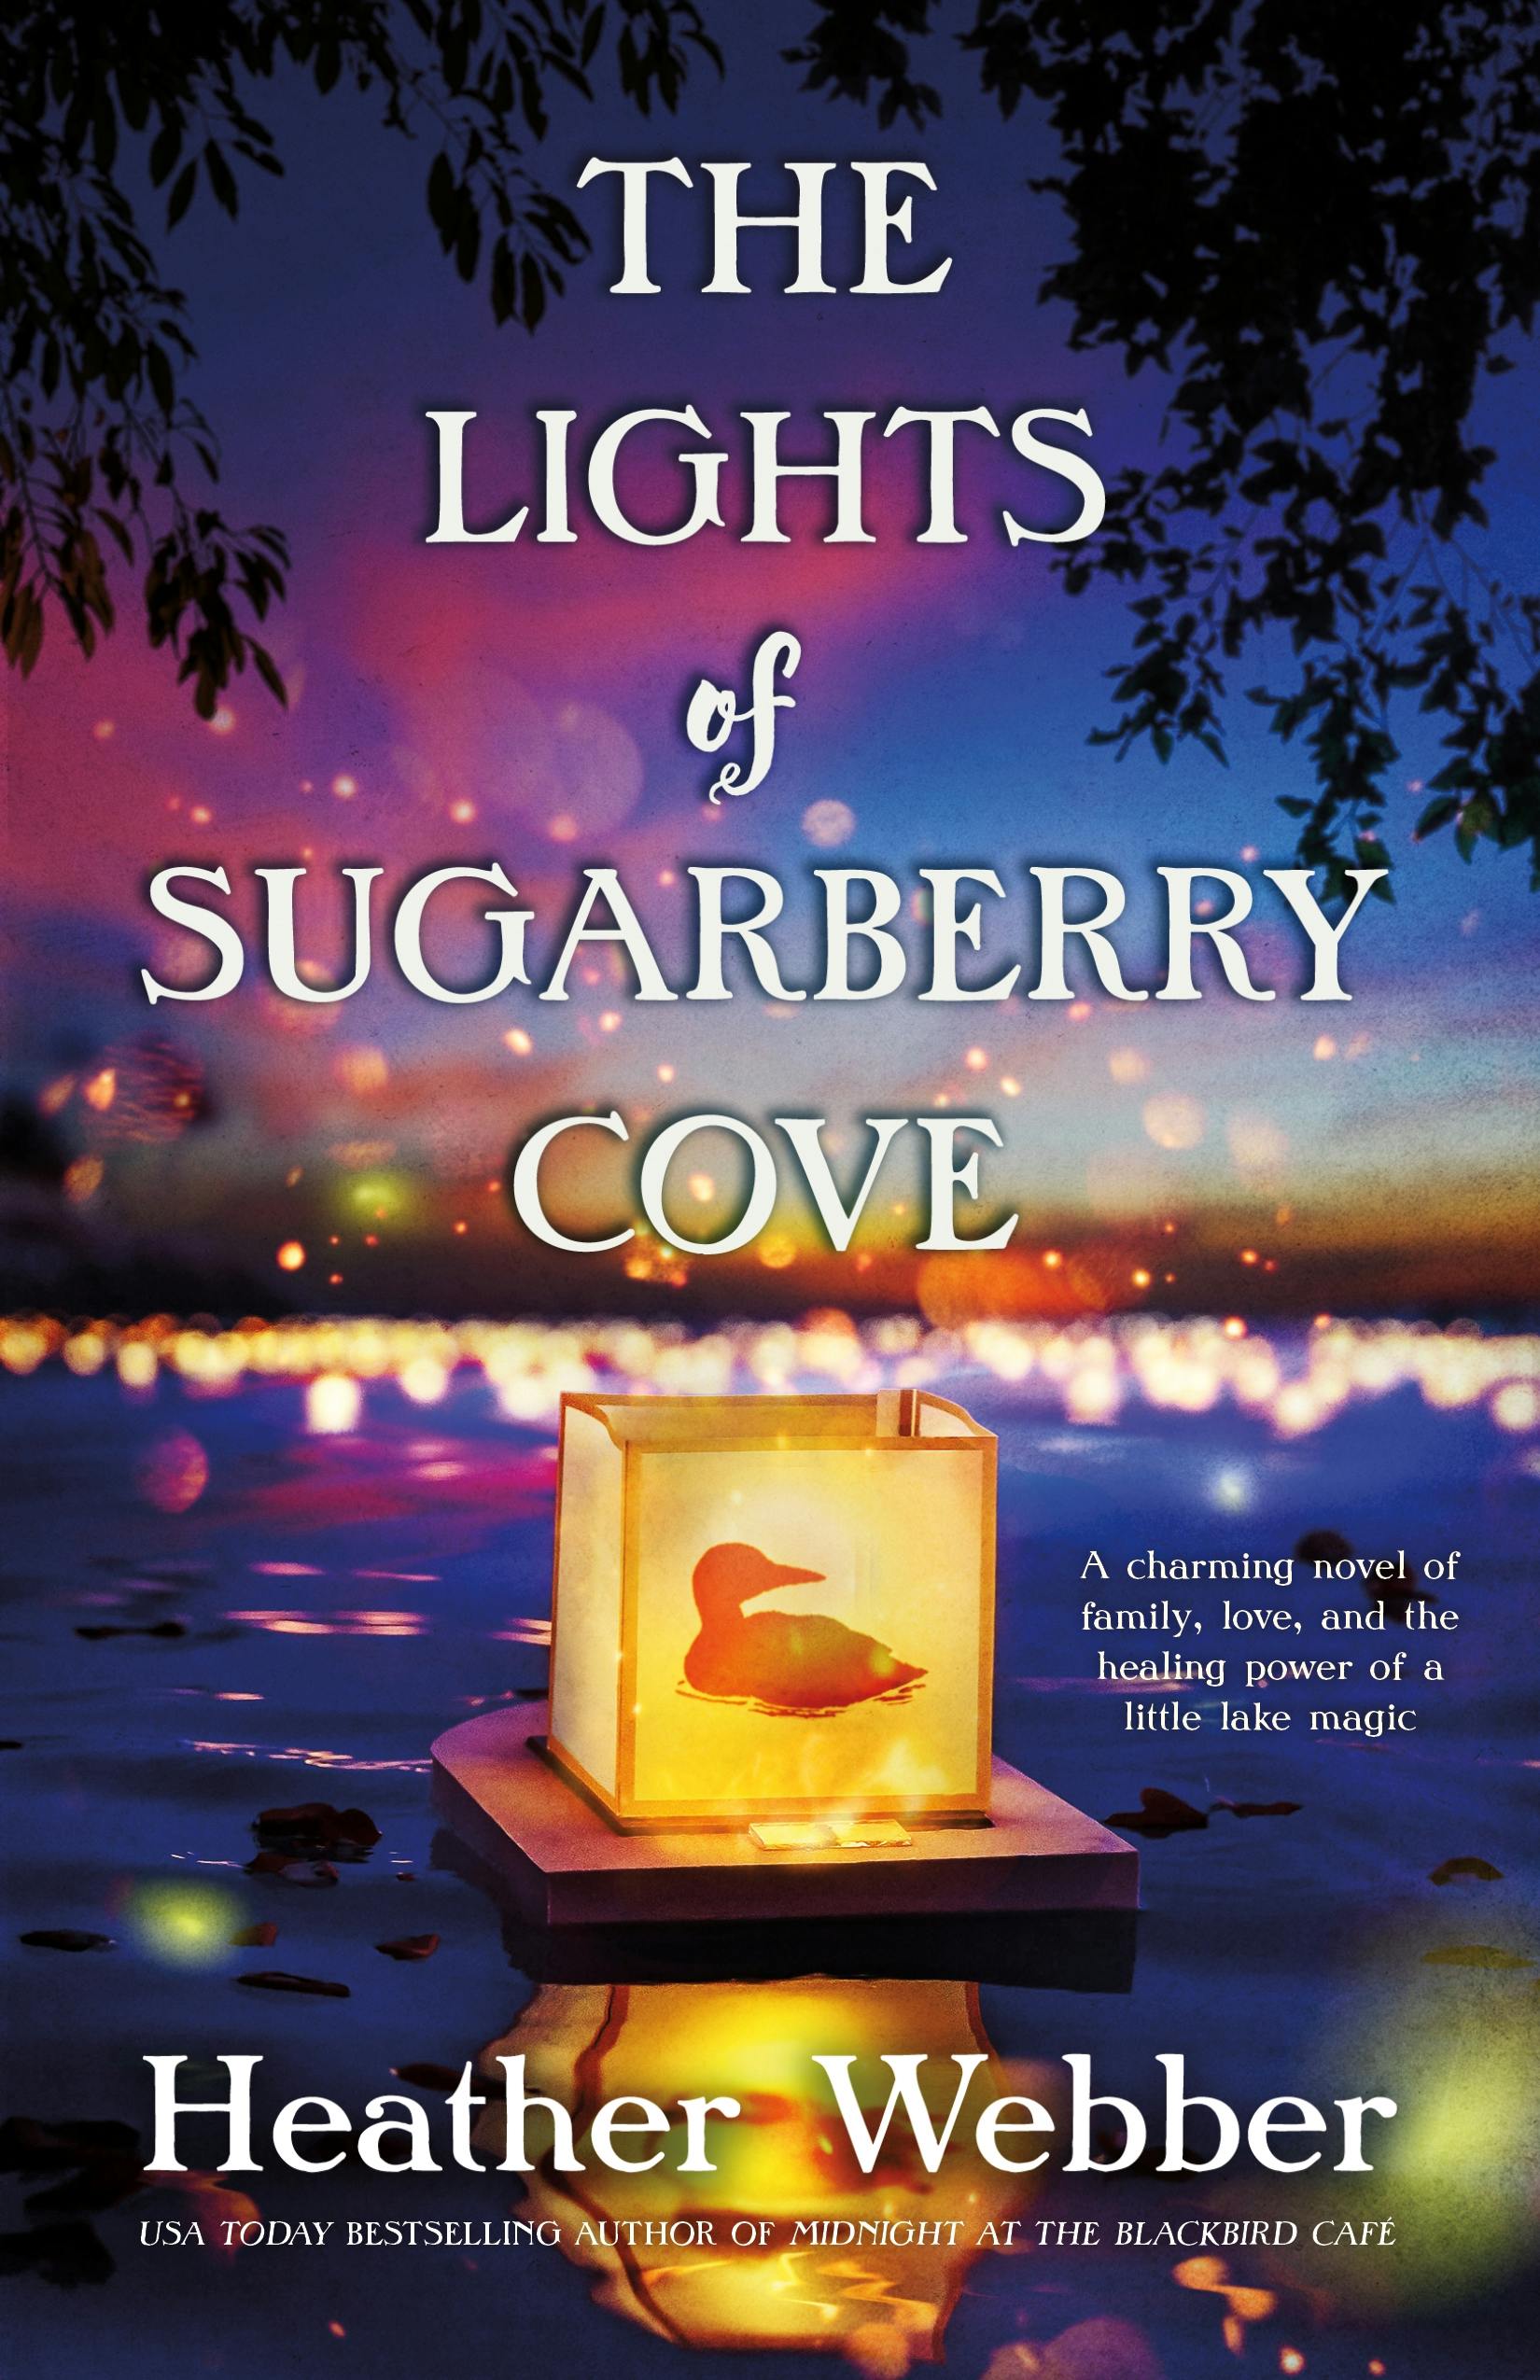 Cover for the book titled as: The Lights of Sugarberry Cove